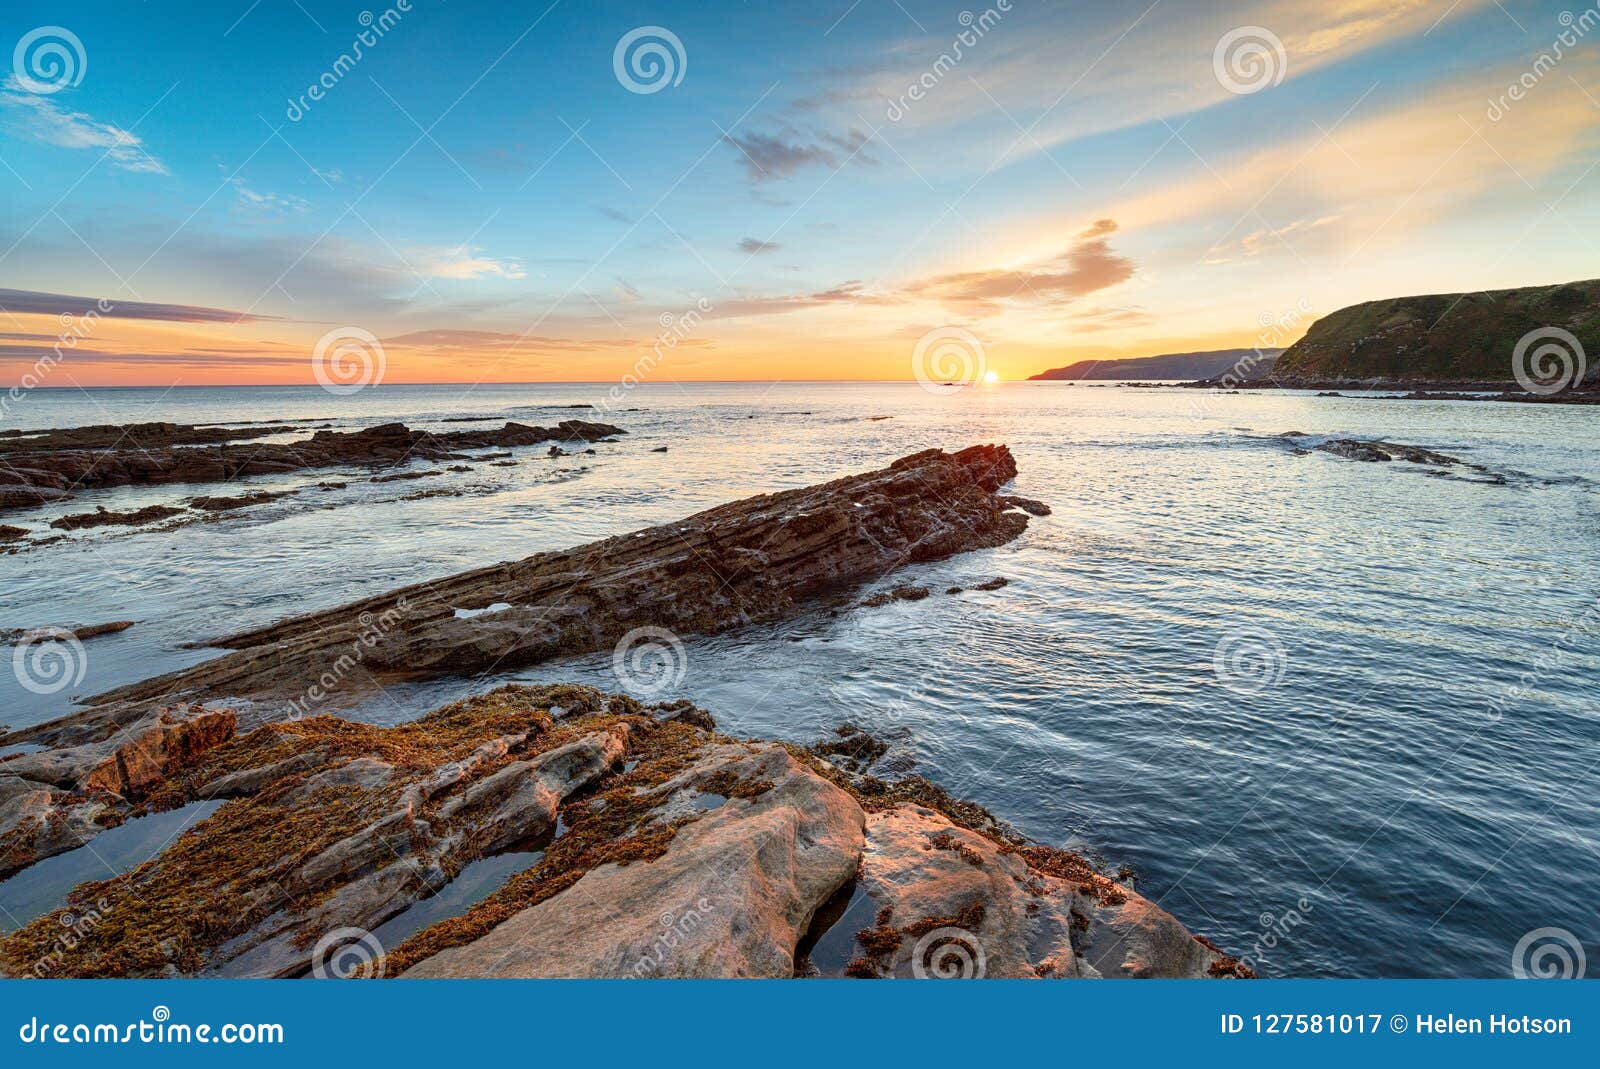 Sunrise Over the Beach at Cove in Scotland Stock Image - Image of ...